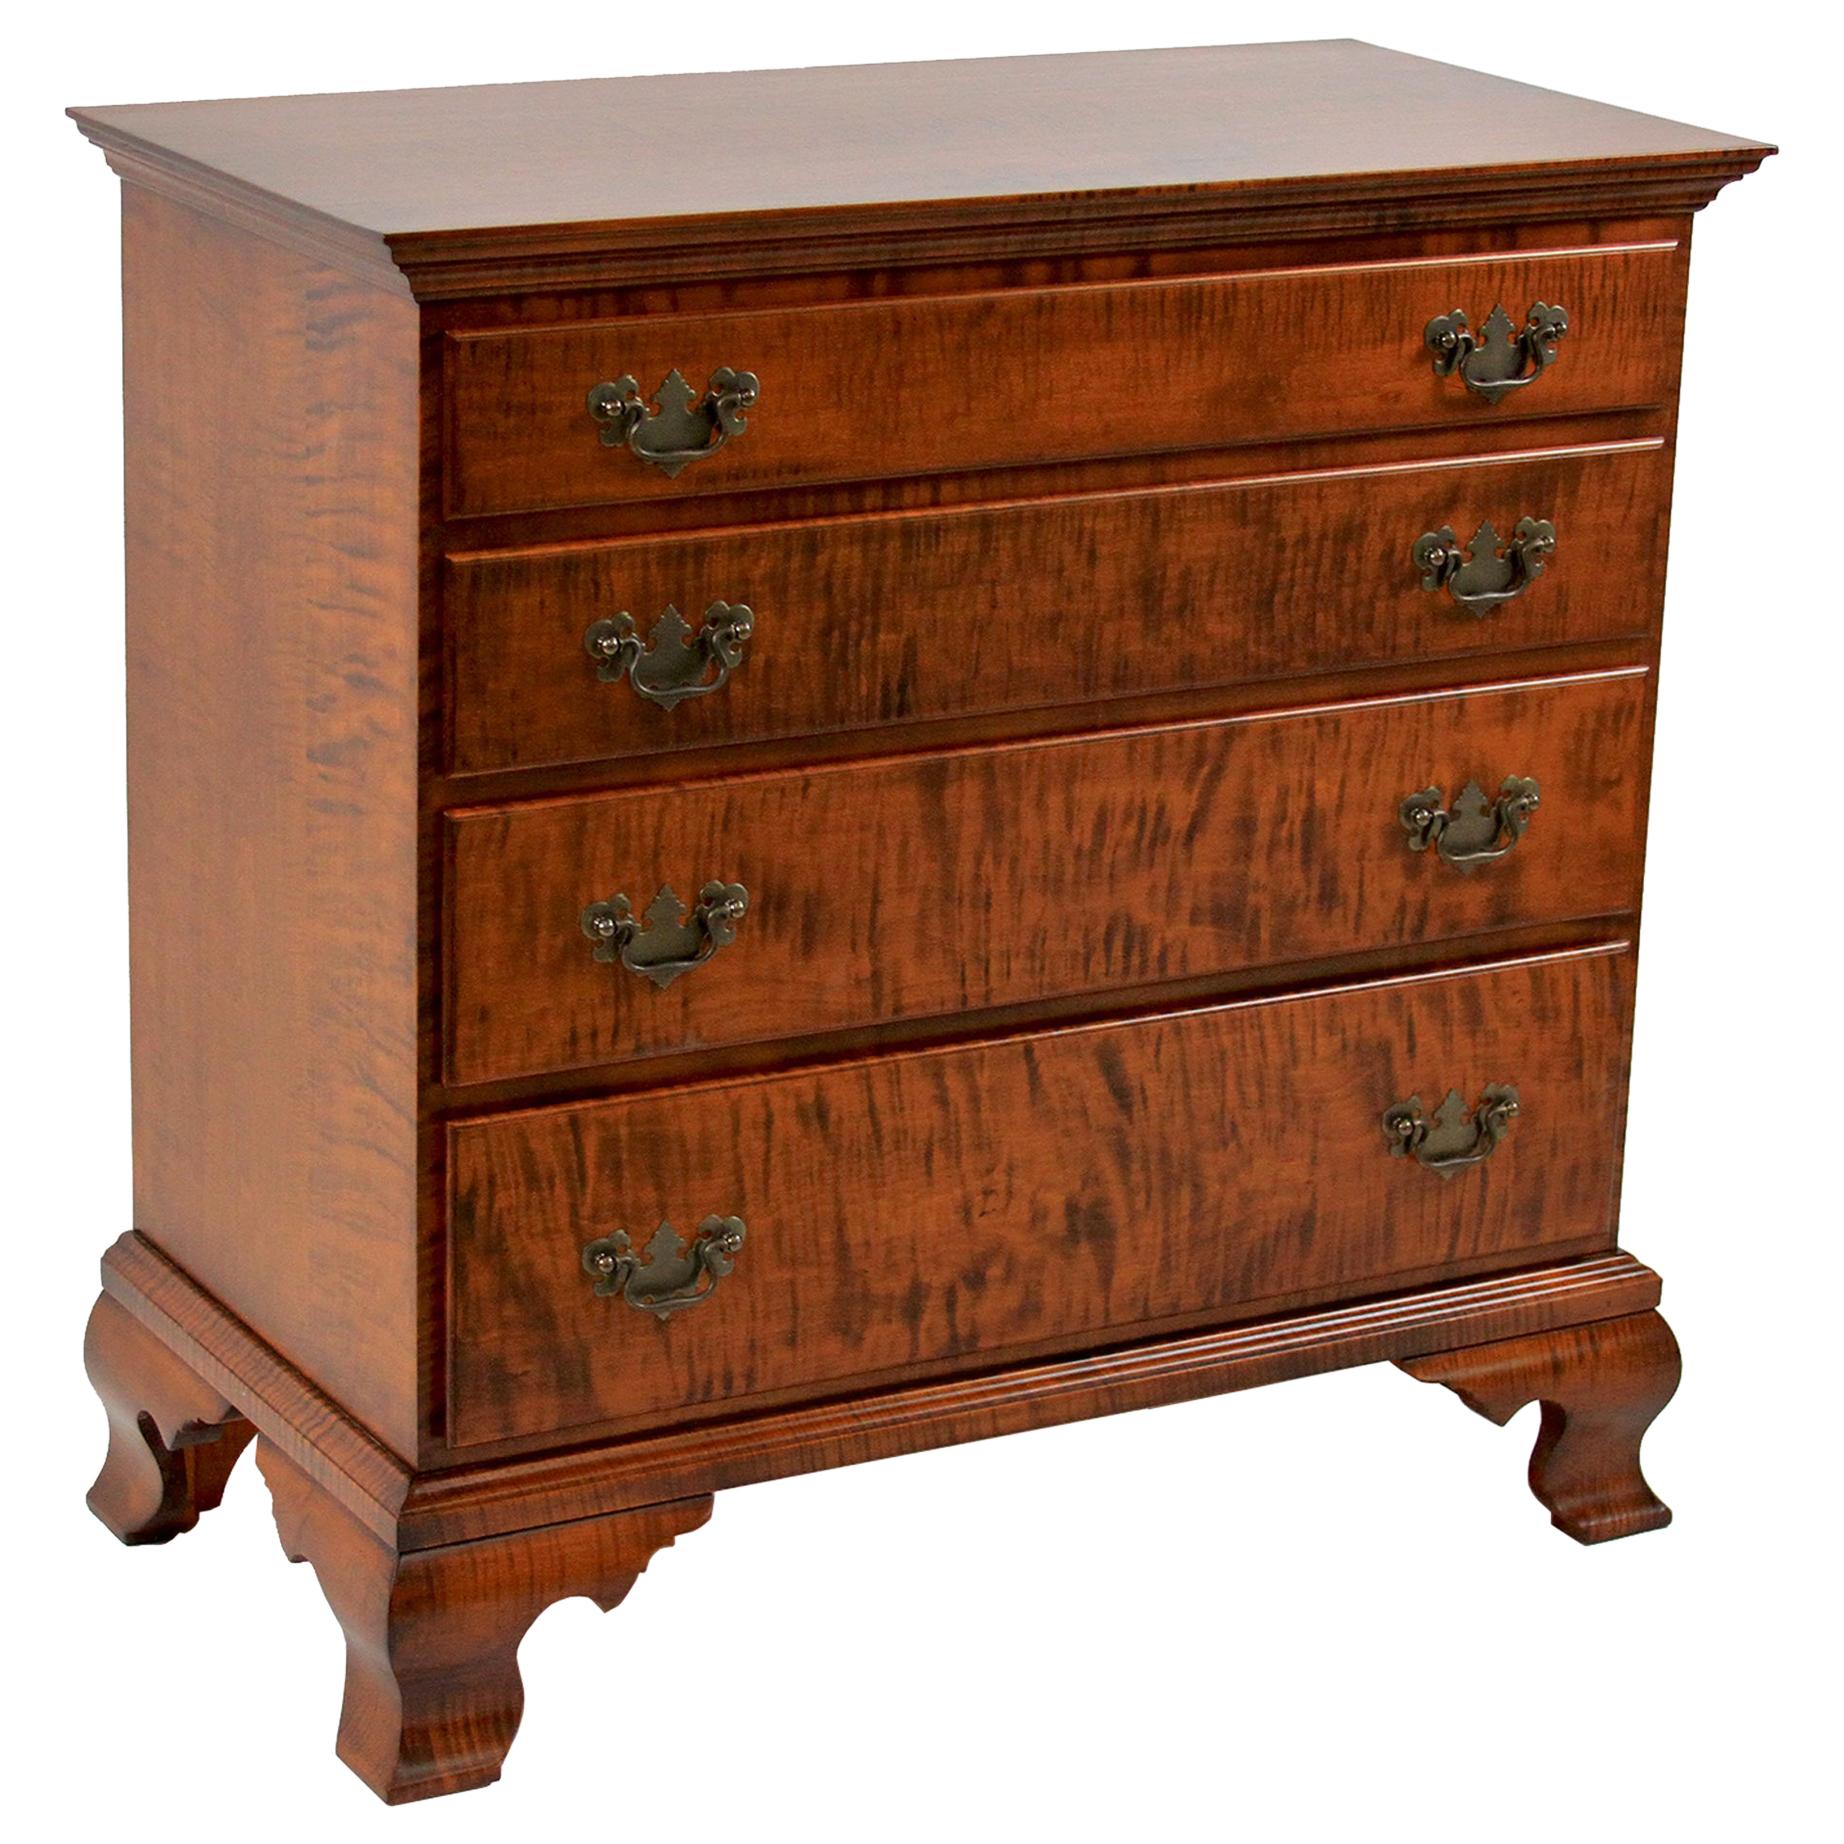 Chippendale Tiger Maple Four Drawer Dresser by Scott James Furniture